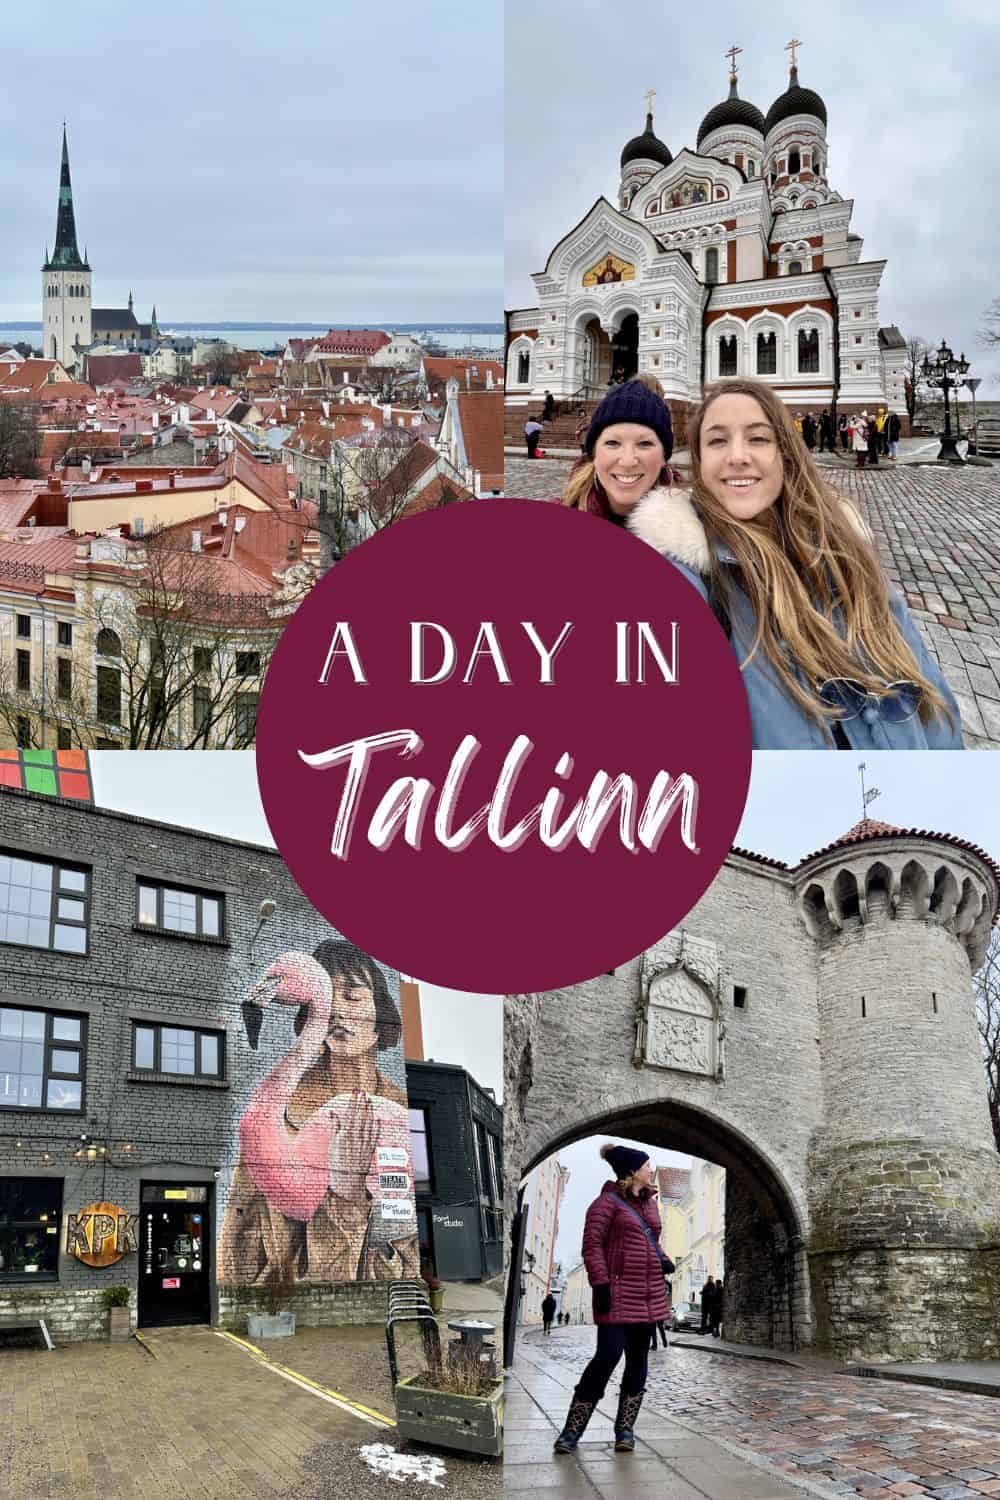 A Day in Tallinn, Estonia | What to do in Tallinn, one of Europe's best-preserved medieval city centers & a great day trip from Helsinki! Spending a day or two in Tallinn is amazing, what to see, best Tallinn hotels, the best things to do in Tallinn. Planning your trip to Estonia, a Tallinn itinerary. #tallinn #estonia #europe